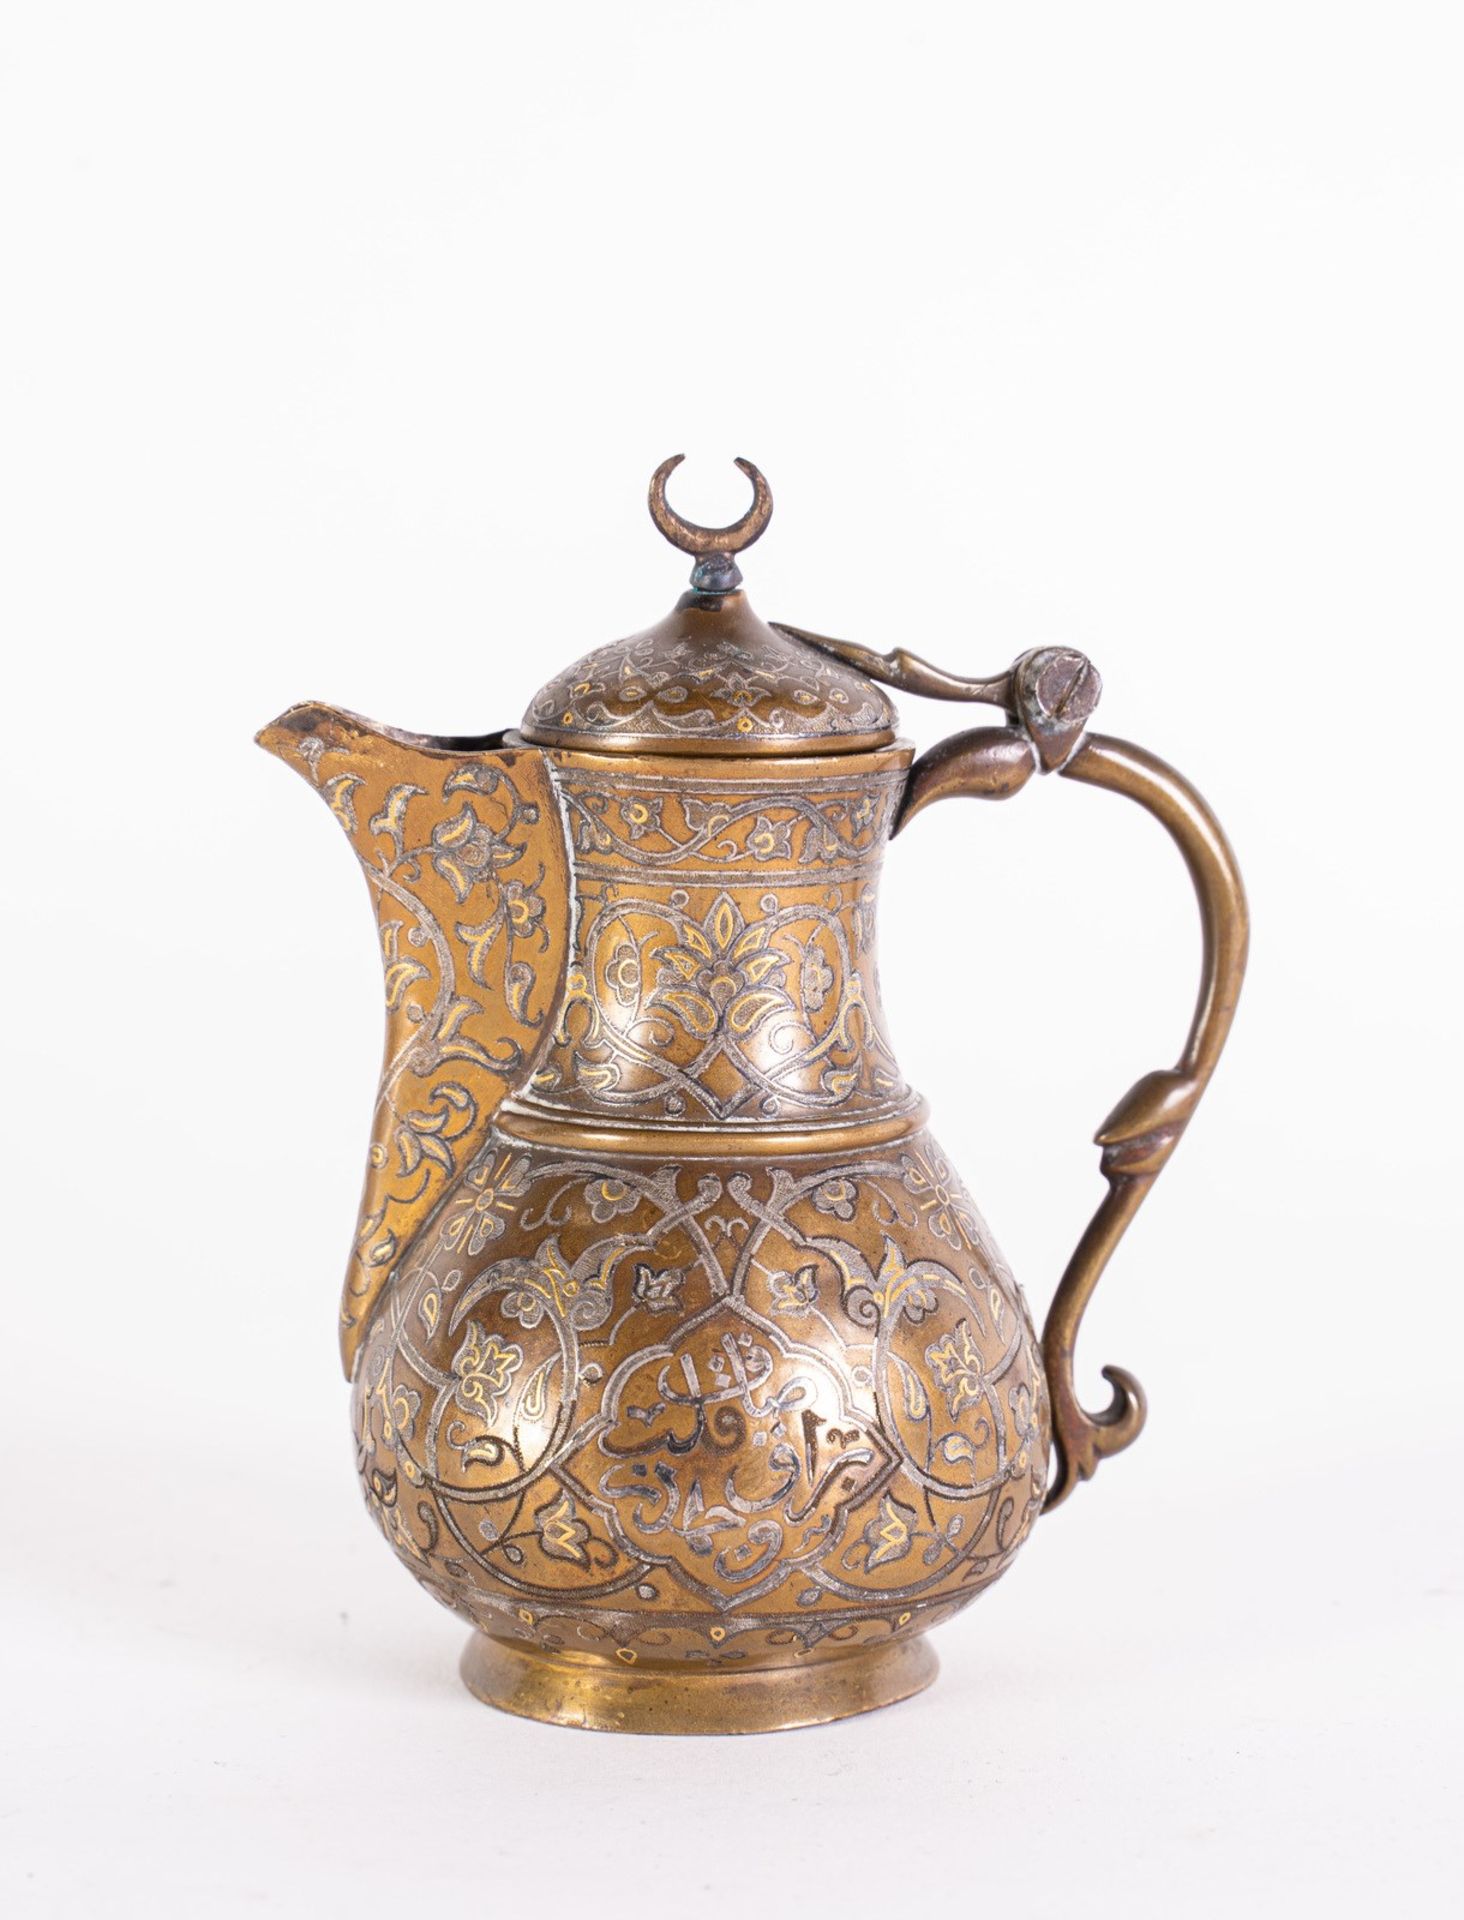 Arte Islamica An Ottoman silver and gold inlaid metal jugTurkey, 19th century .